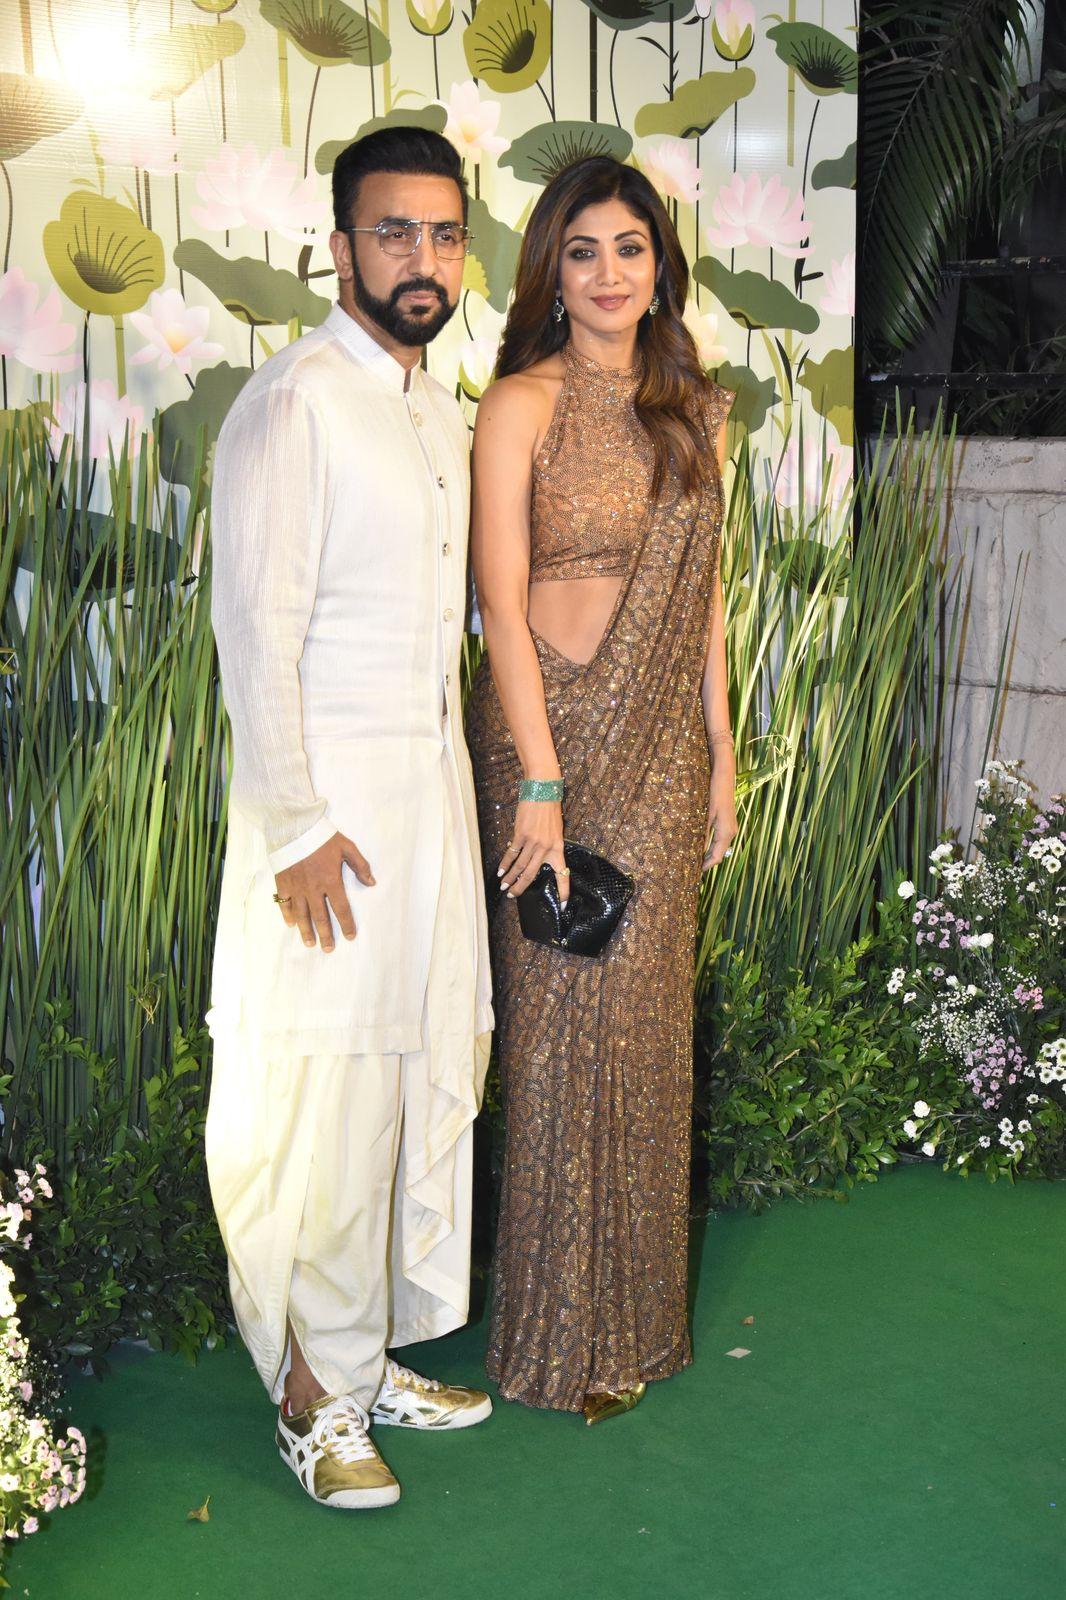 Shilpa Shetty and Raj Kundra posed for pictures looking stunning!